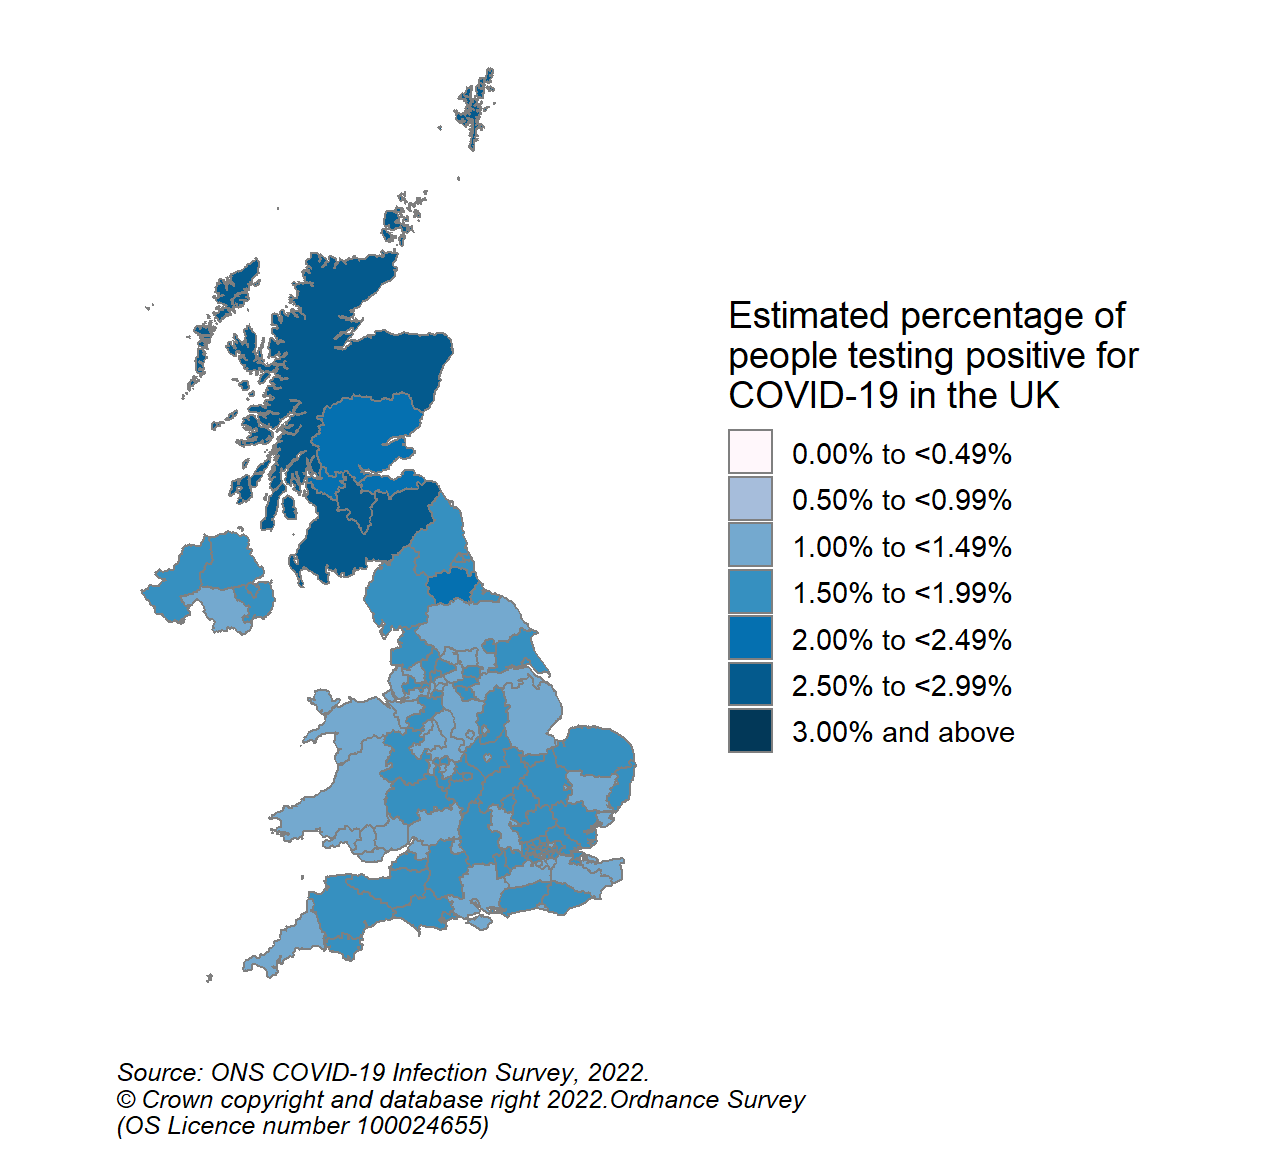 A colour coded map of the UK showing modelled estimates of the percentage of people living in private households within each COVID-19 Infection Survey sub-region who would have tested positive for COVID-19 in the week 27 May to 2 June 2022.   In Scotland, sub-regions are comprised of Health Boards. Sub-region 123 contains NHS Grampian, NHS Highland, NHS Orkney, NHS Shetland and NHS Western Isles, sub-region 124 contains NHS Fife, NHS Forth Valley and NHS Tayside, sub-region 125 contains NHS Greater Glasgow & Clyde, sub-region 126 contains NHS Lothian, sub-region 127 contains NHS Lanarkshire, and sub-region 128 contains NHS Ayrshire & Arran, NHS Borders and NHS Dumfries & Galloway.  The map ranges from very light blue for 1.00% to 1.49%, light blue for 1.50% to 1.99%, blue for 2.00% to 2.49%, and darker blue for 2.50% to 2.99% estimated positivity. Scotland CIS sub-regions are marked with blue (2.00% to 2.49%) and darker blue (2.50% to 2.99% positivity).